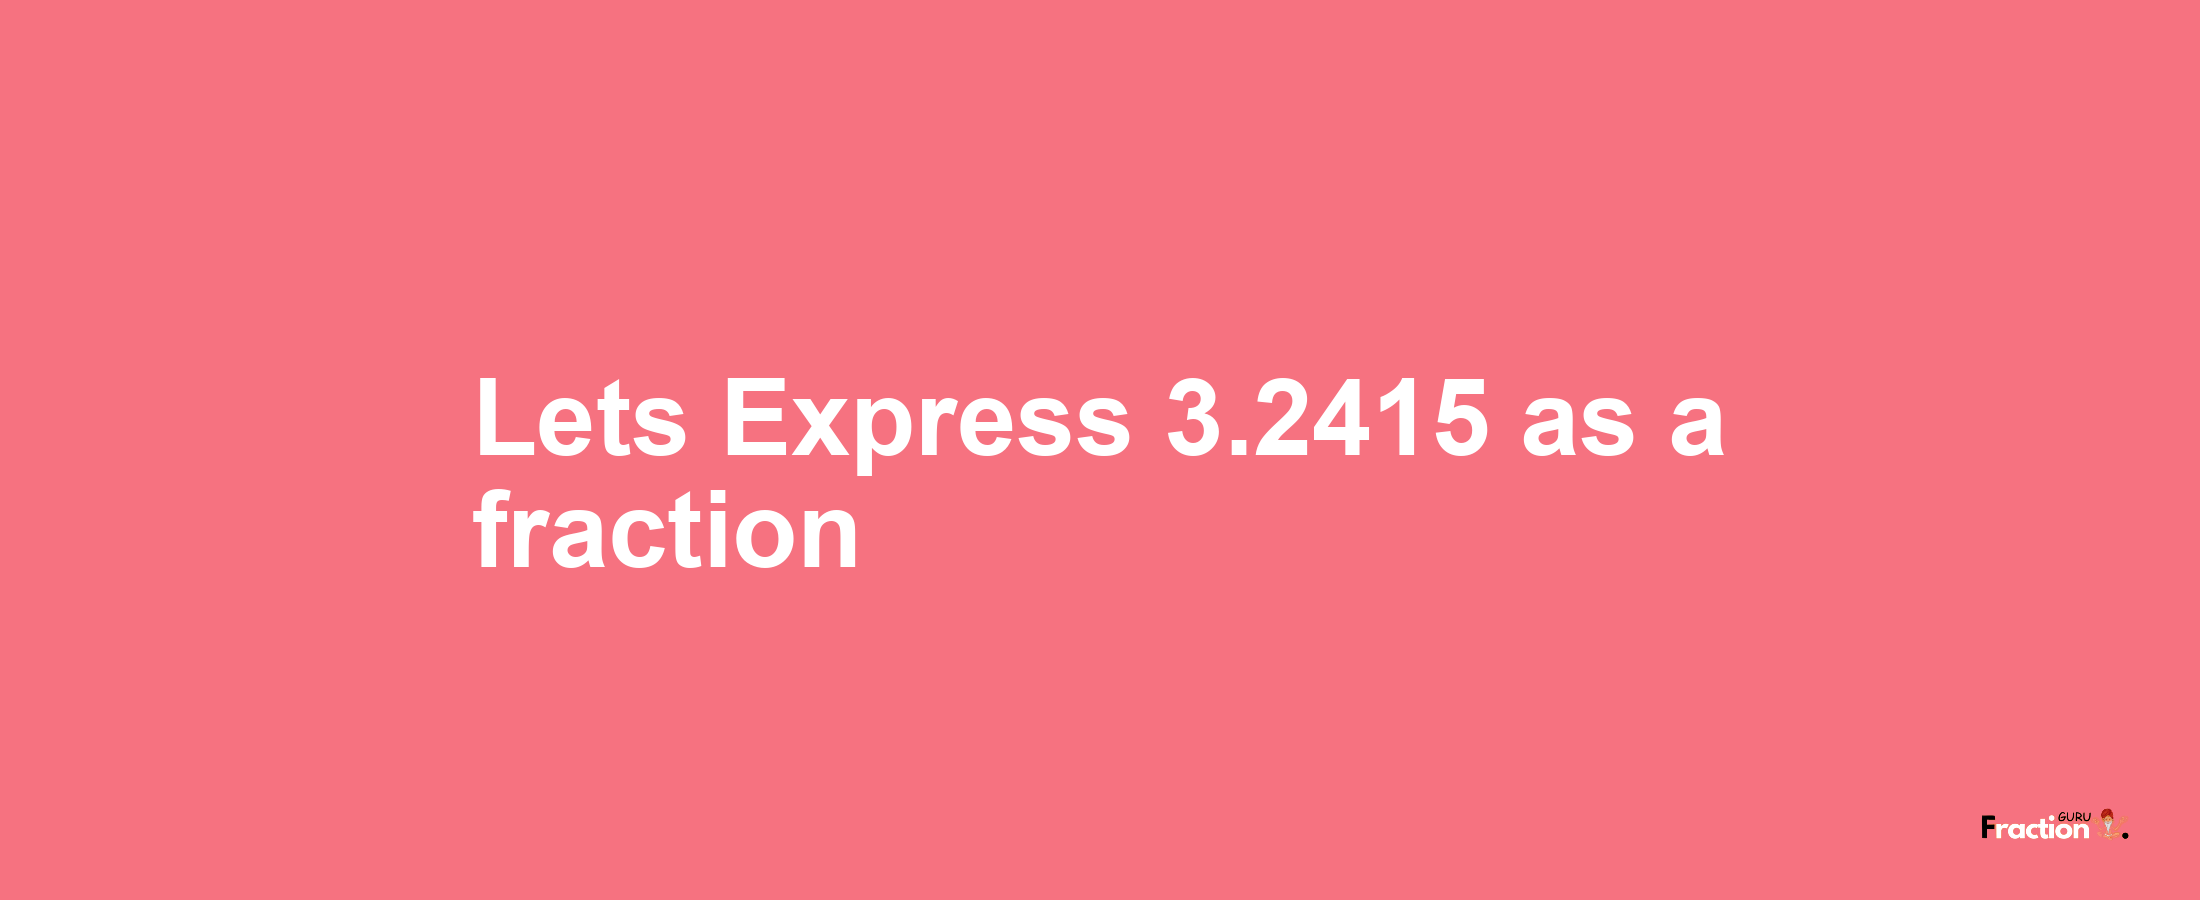 Lets Express 3.2415 as afraction